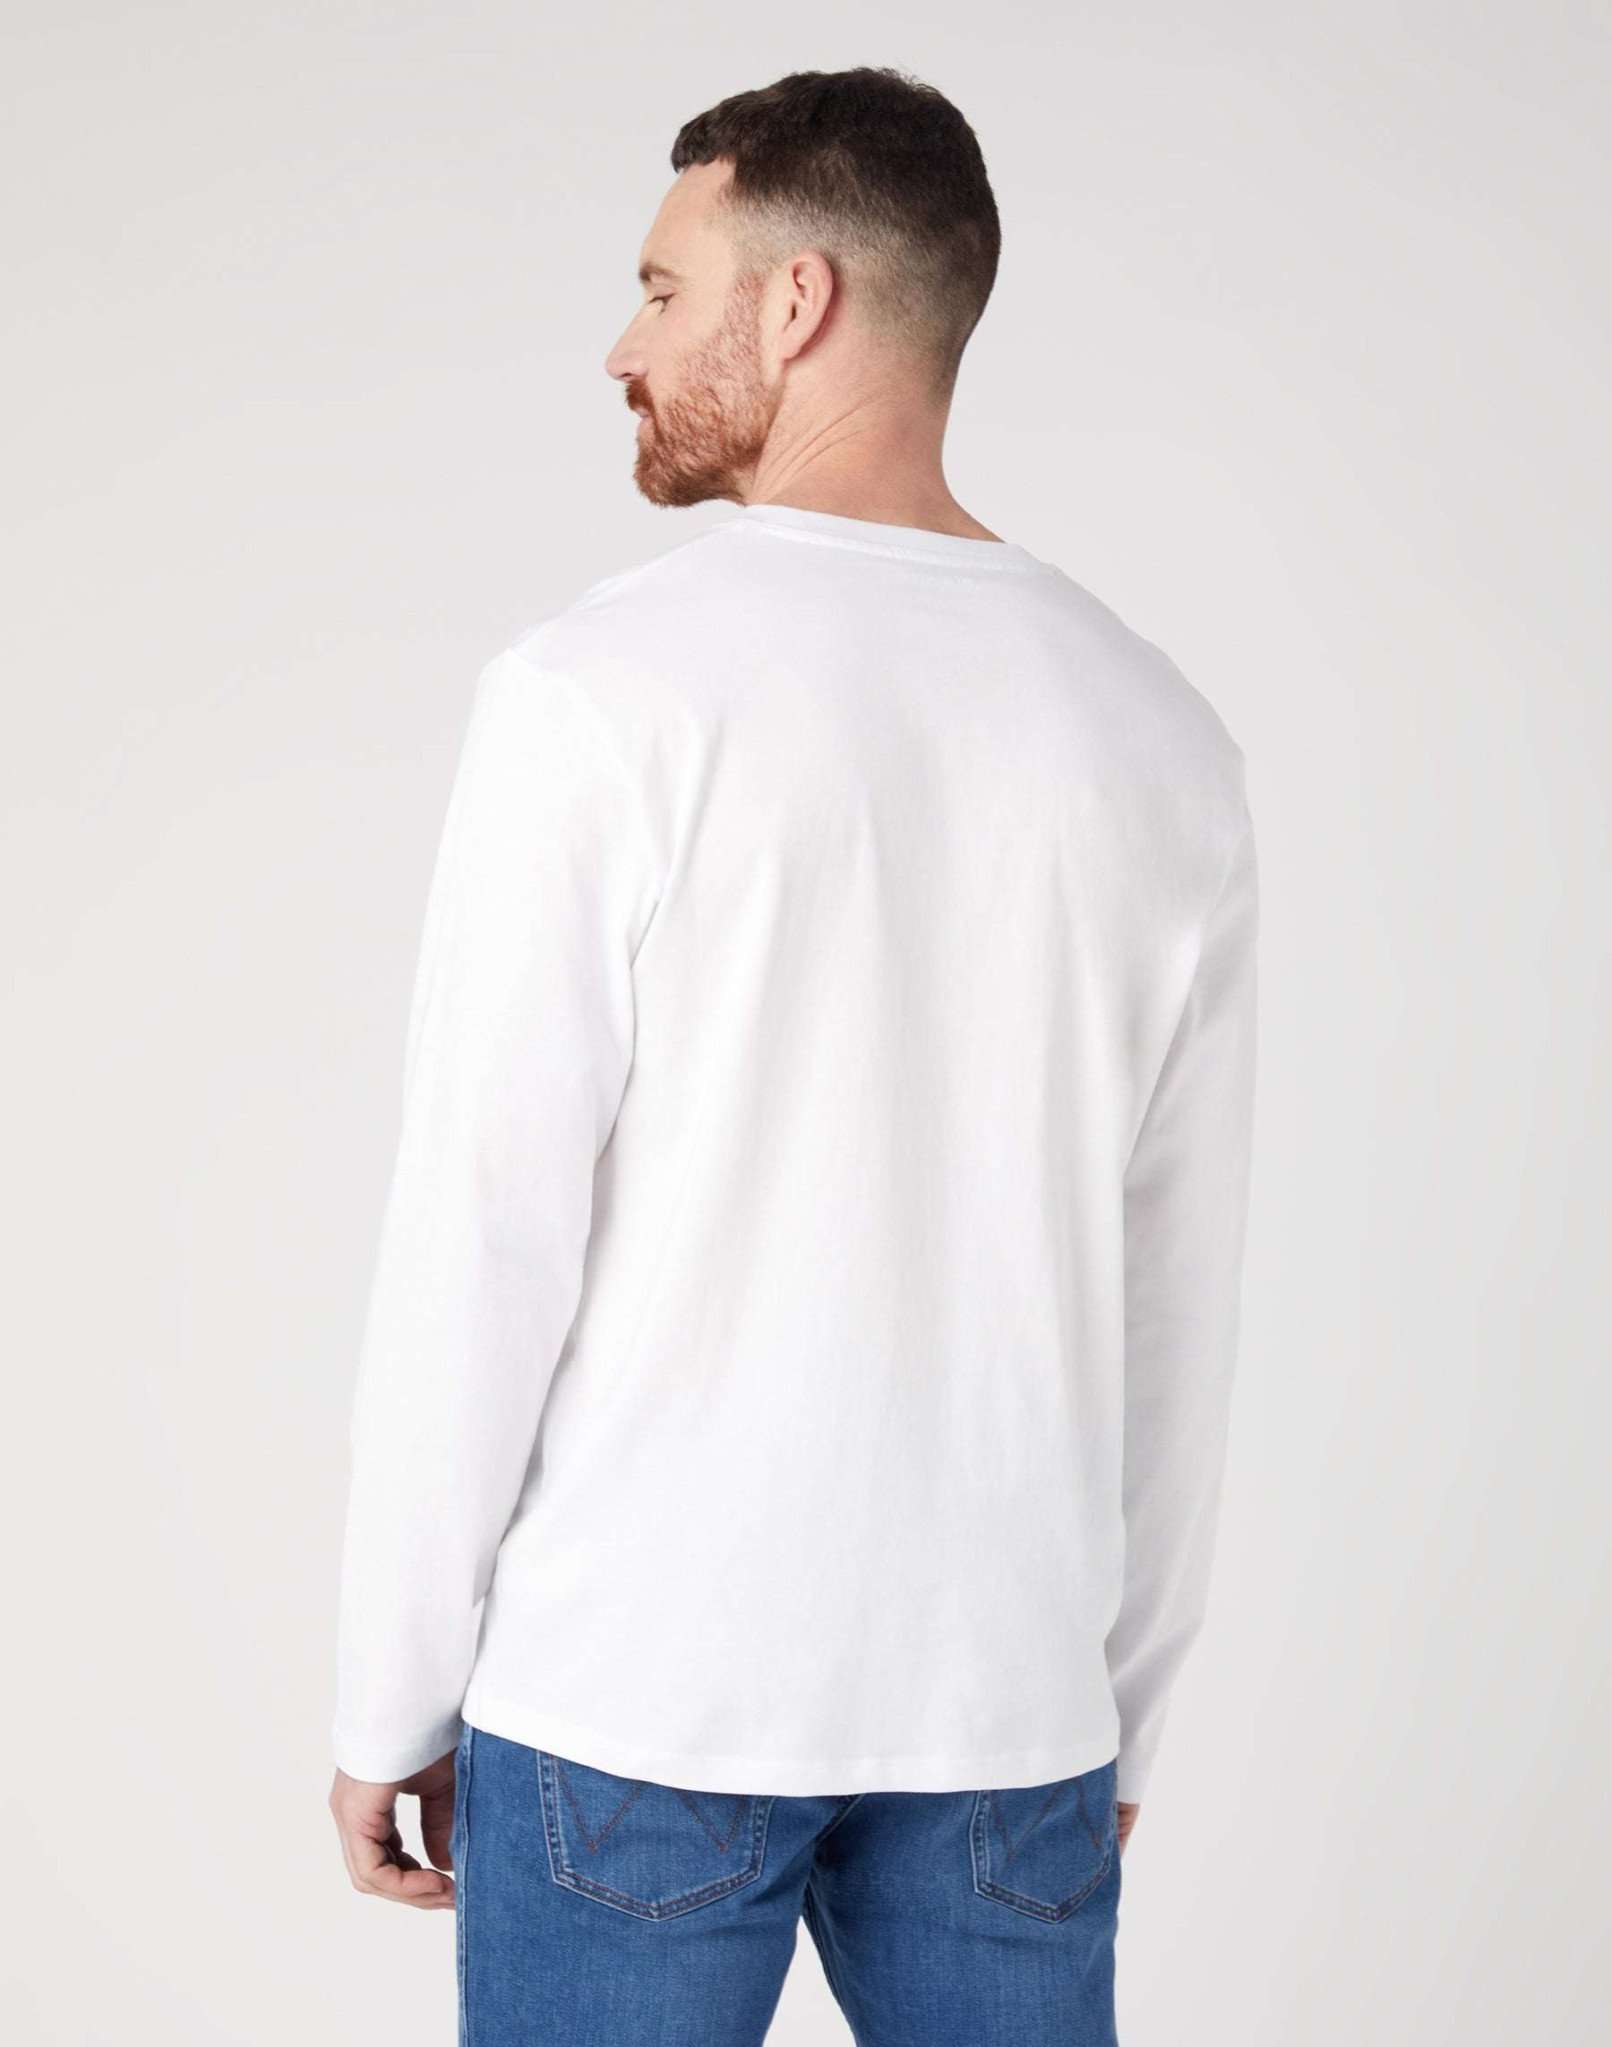 LS Sign Off Tee in White Pullover Wrangler   